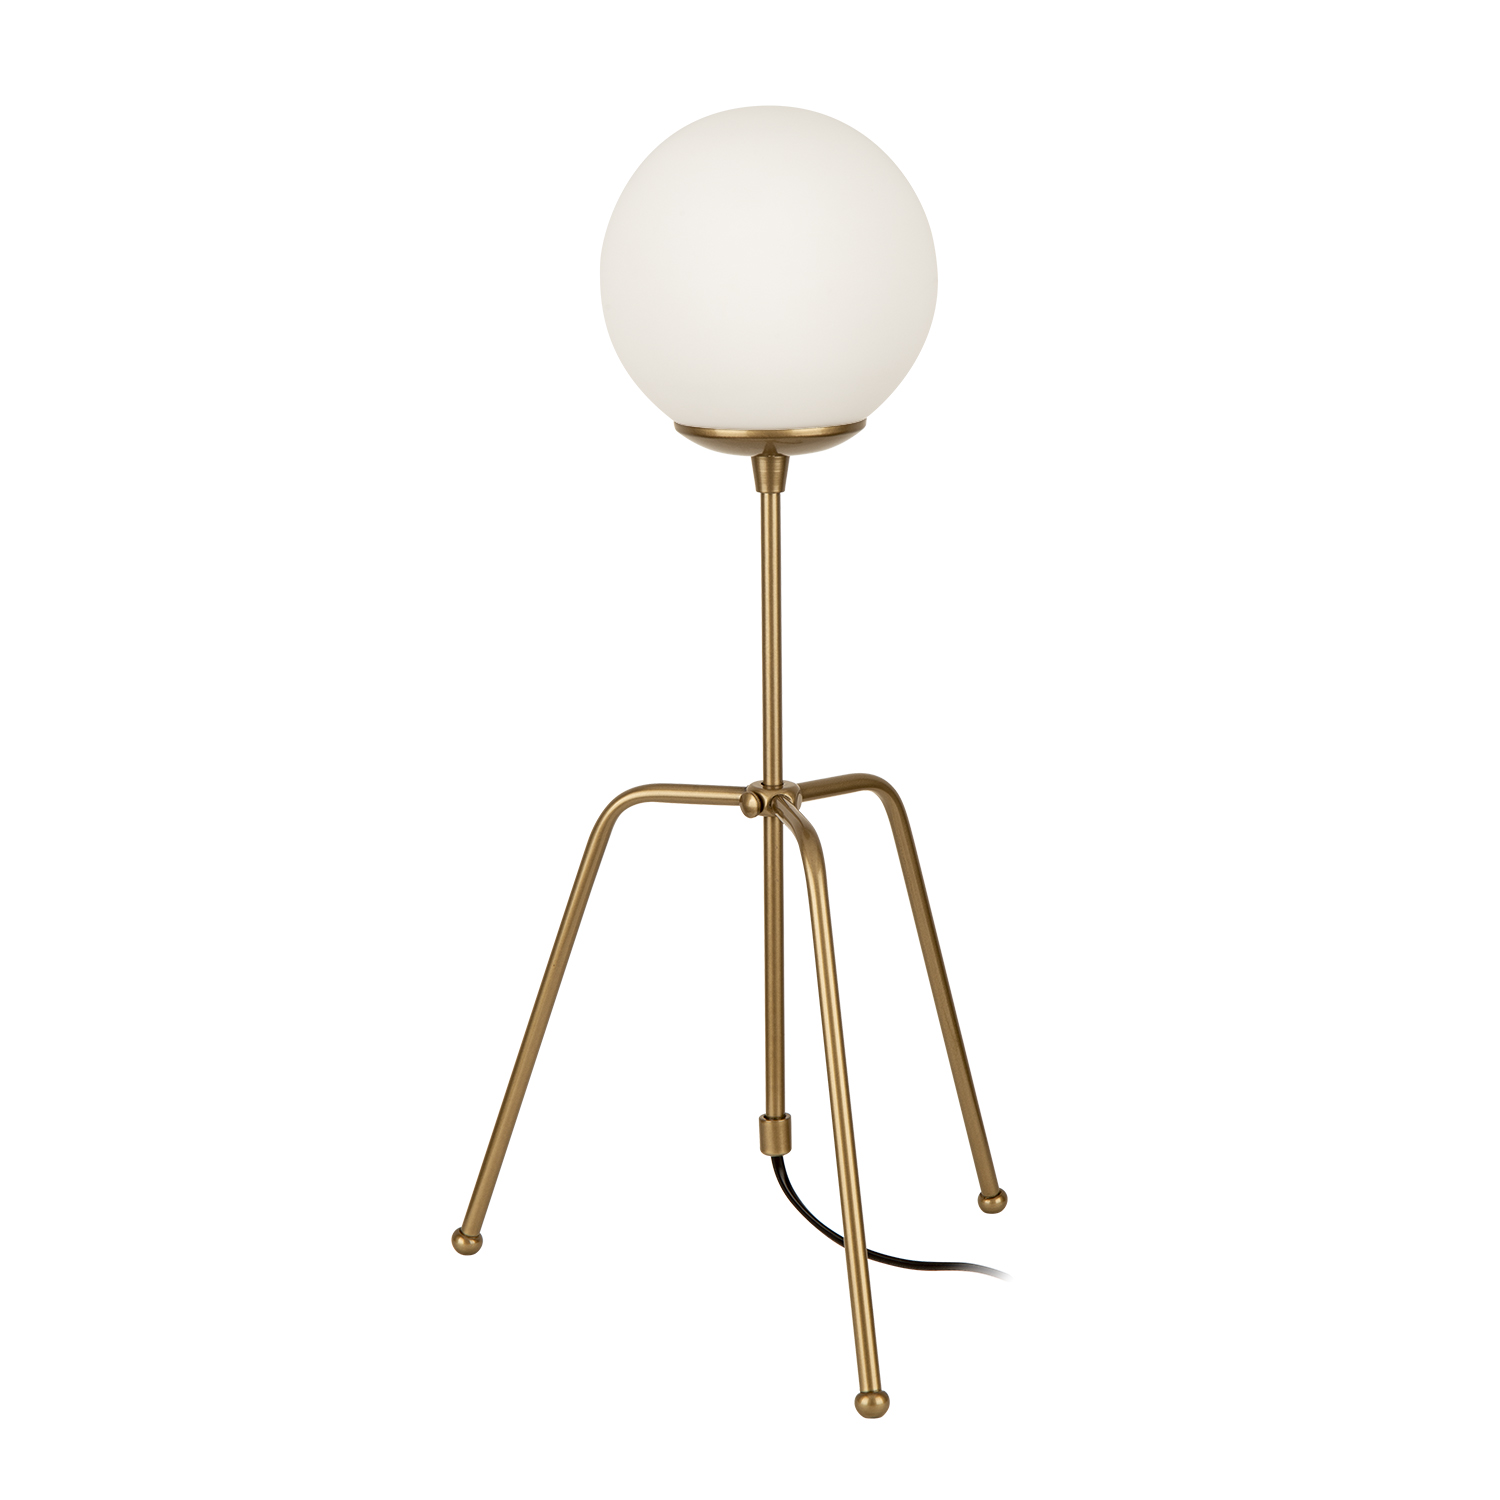 STAR Table Lamp gold
white